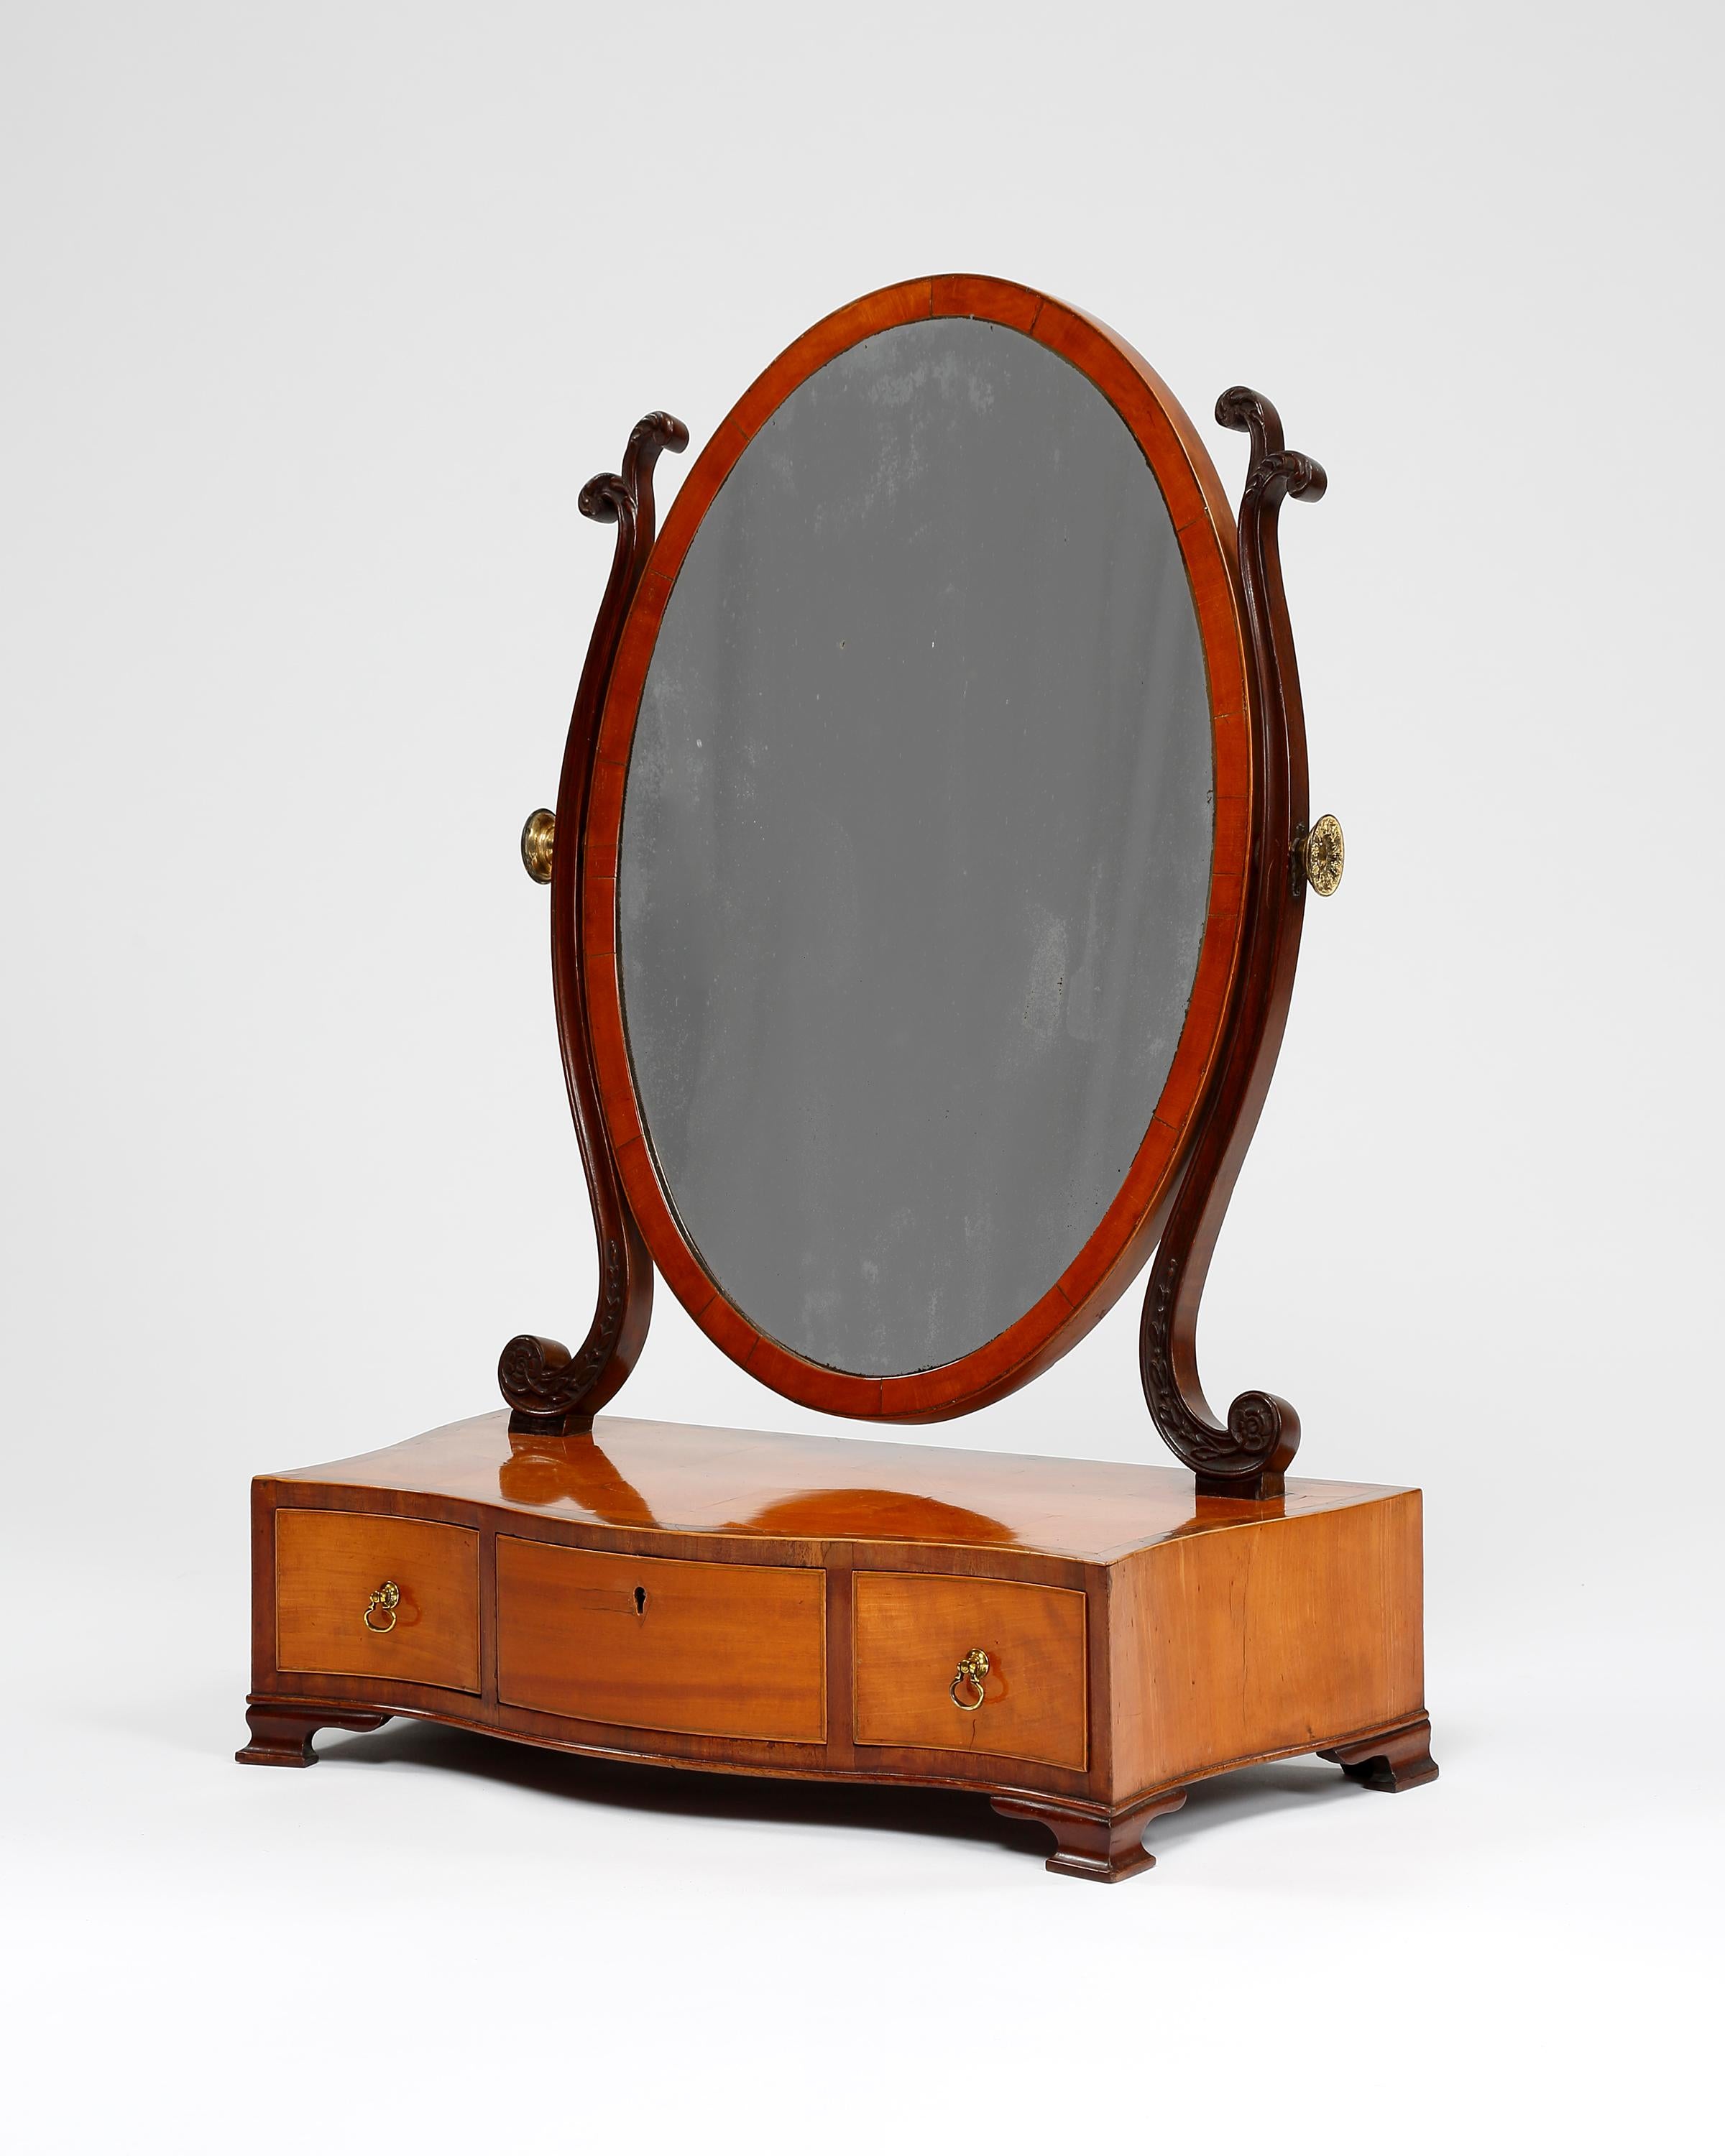 A George III period satinwood veneered toilet mirror. Serpentine sides and front, having three small drawers, edged in boxwood throughout. Possibly the original oval mirror plate with fine s-shaped carved supports, English, circa 1775.